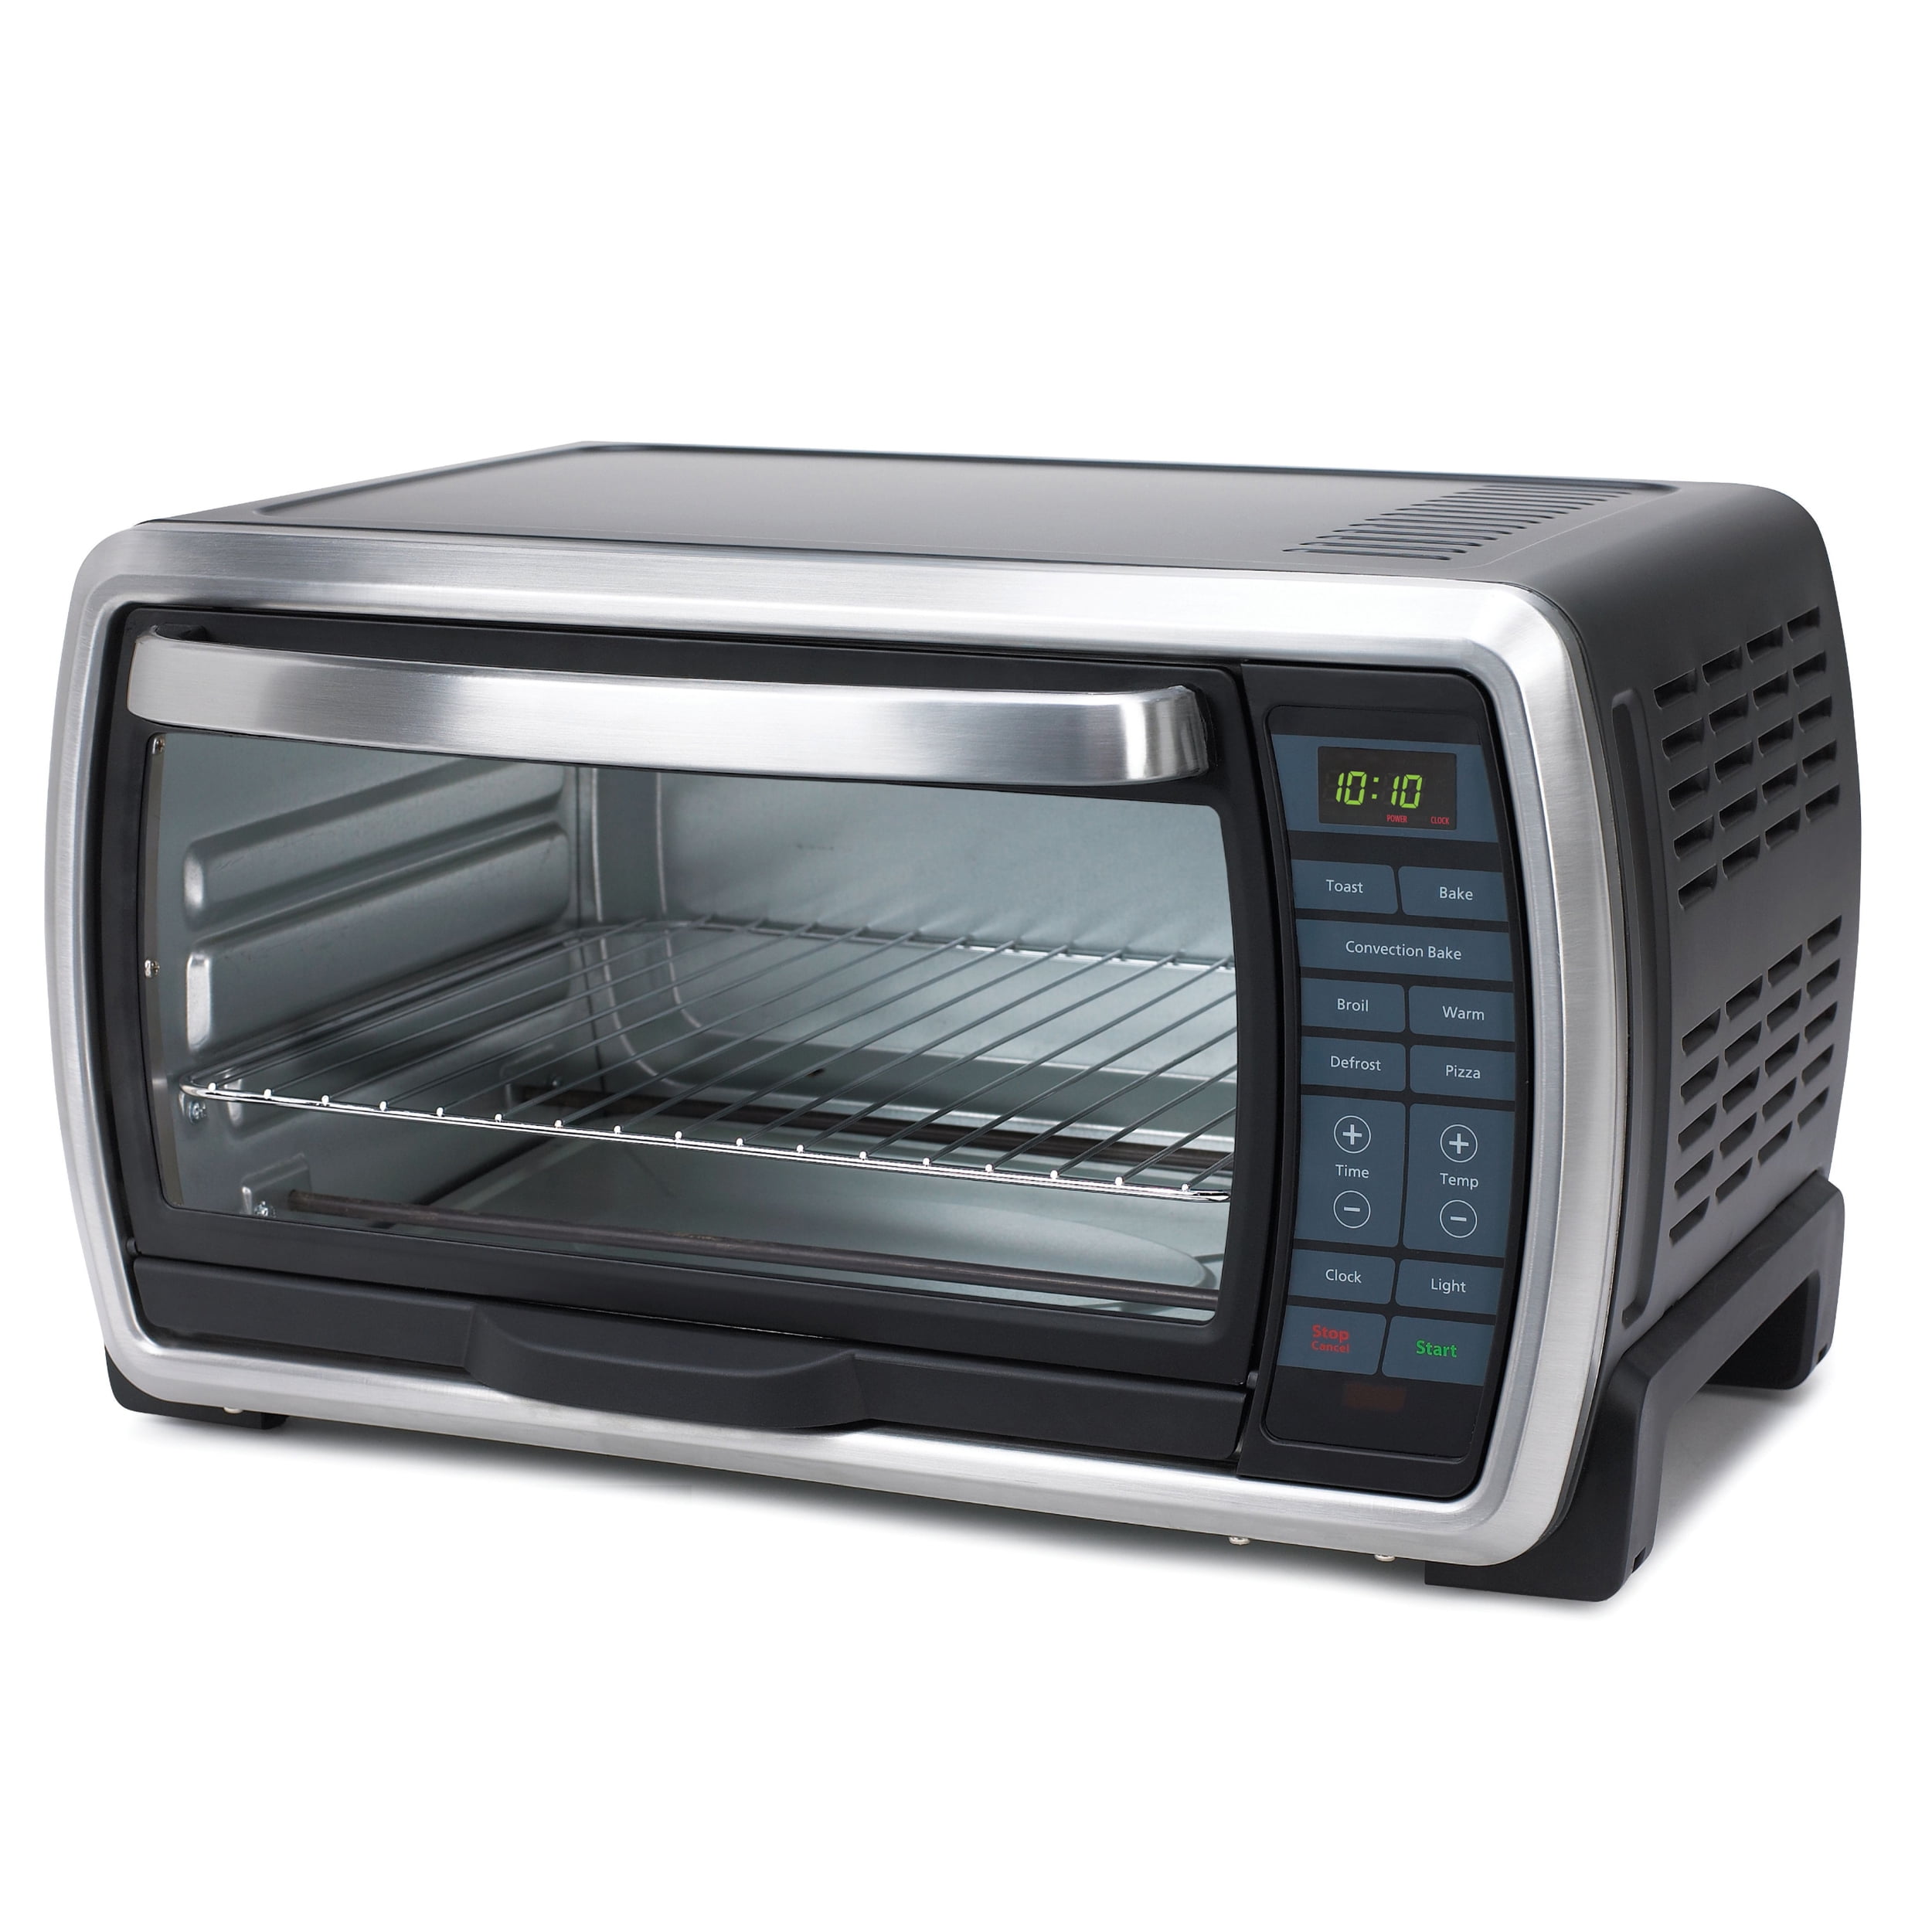 Oster Convection Oven Review & First Impressions 